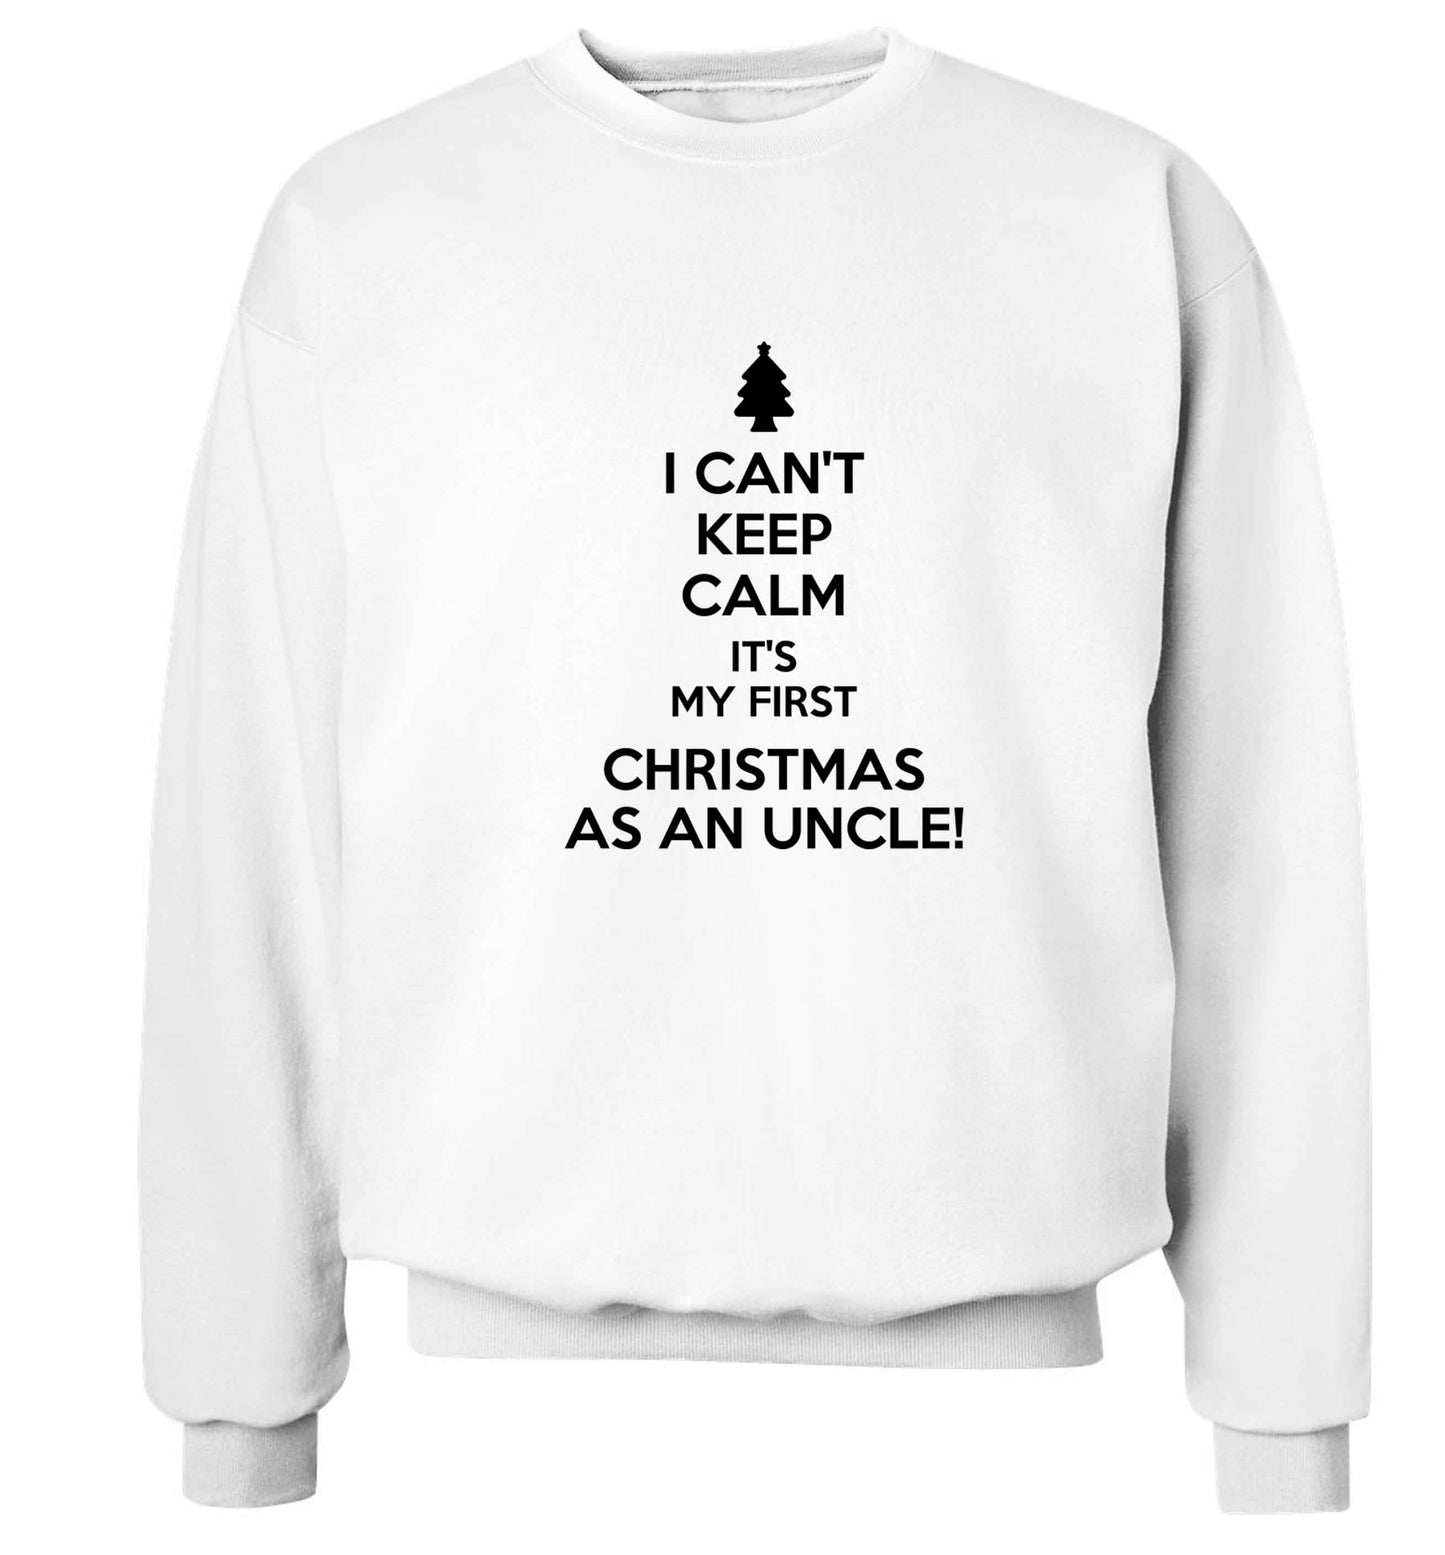 I can't keep calm it's my first Christmas as an uncle! Adult's unisex white Sweater 2XL